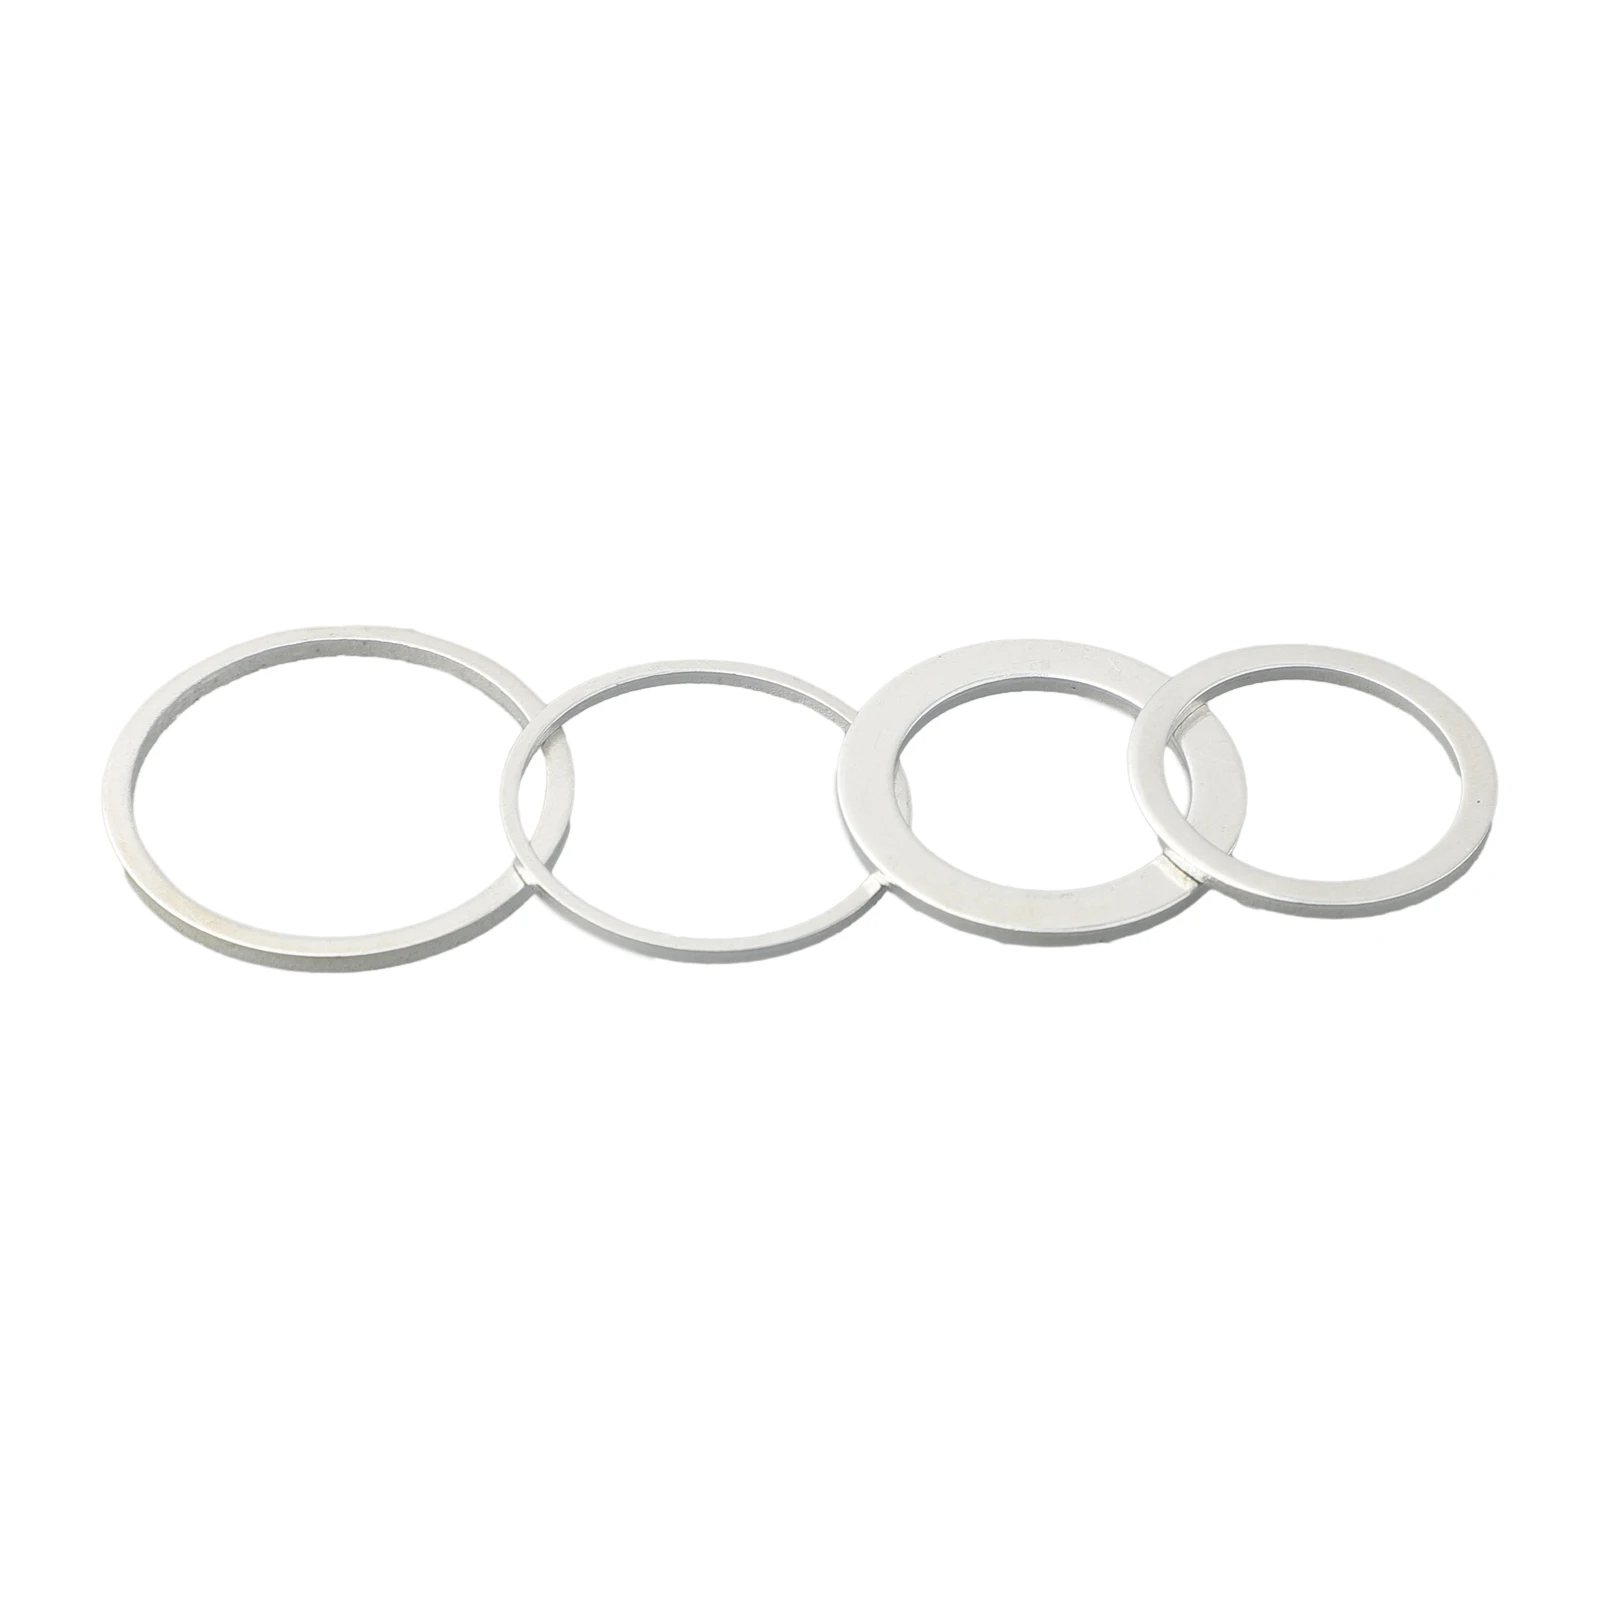 Circular Saw Ring Reduction Ring Replacement Silver 4 Sizes 4Pcs Conversion Ring Metal Useful Brand New Durable 5pcs soldering tips 900m t equipment pure copper screwdriver silver solder soldering useful durable industrial